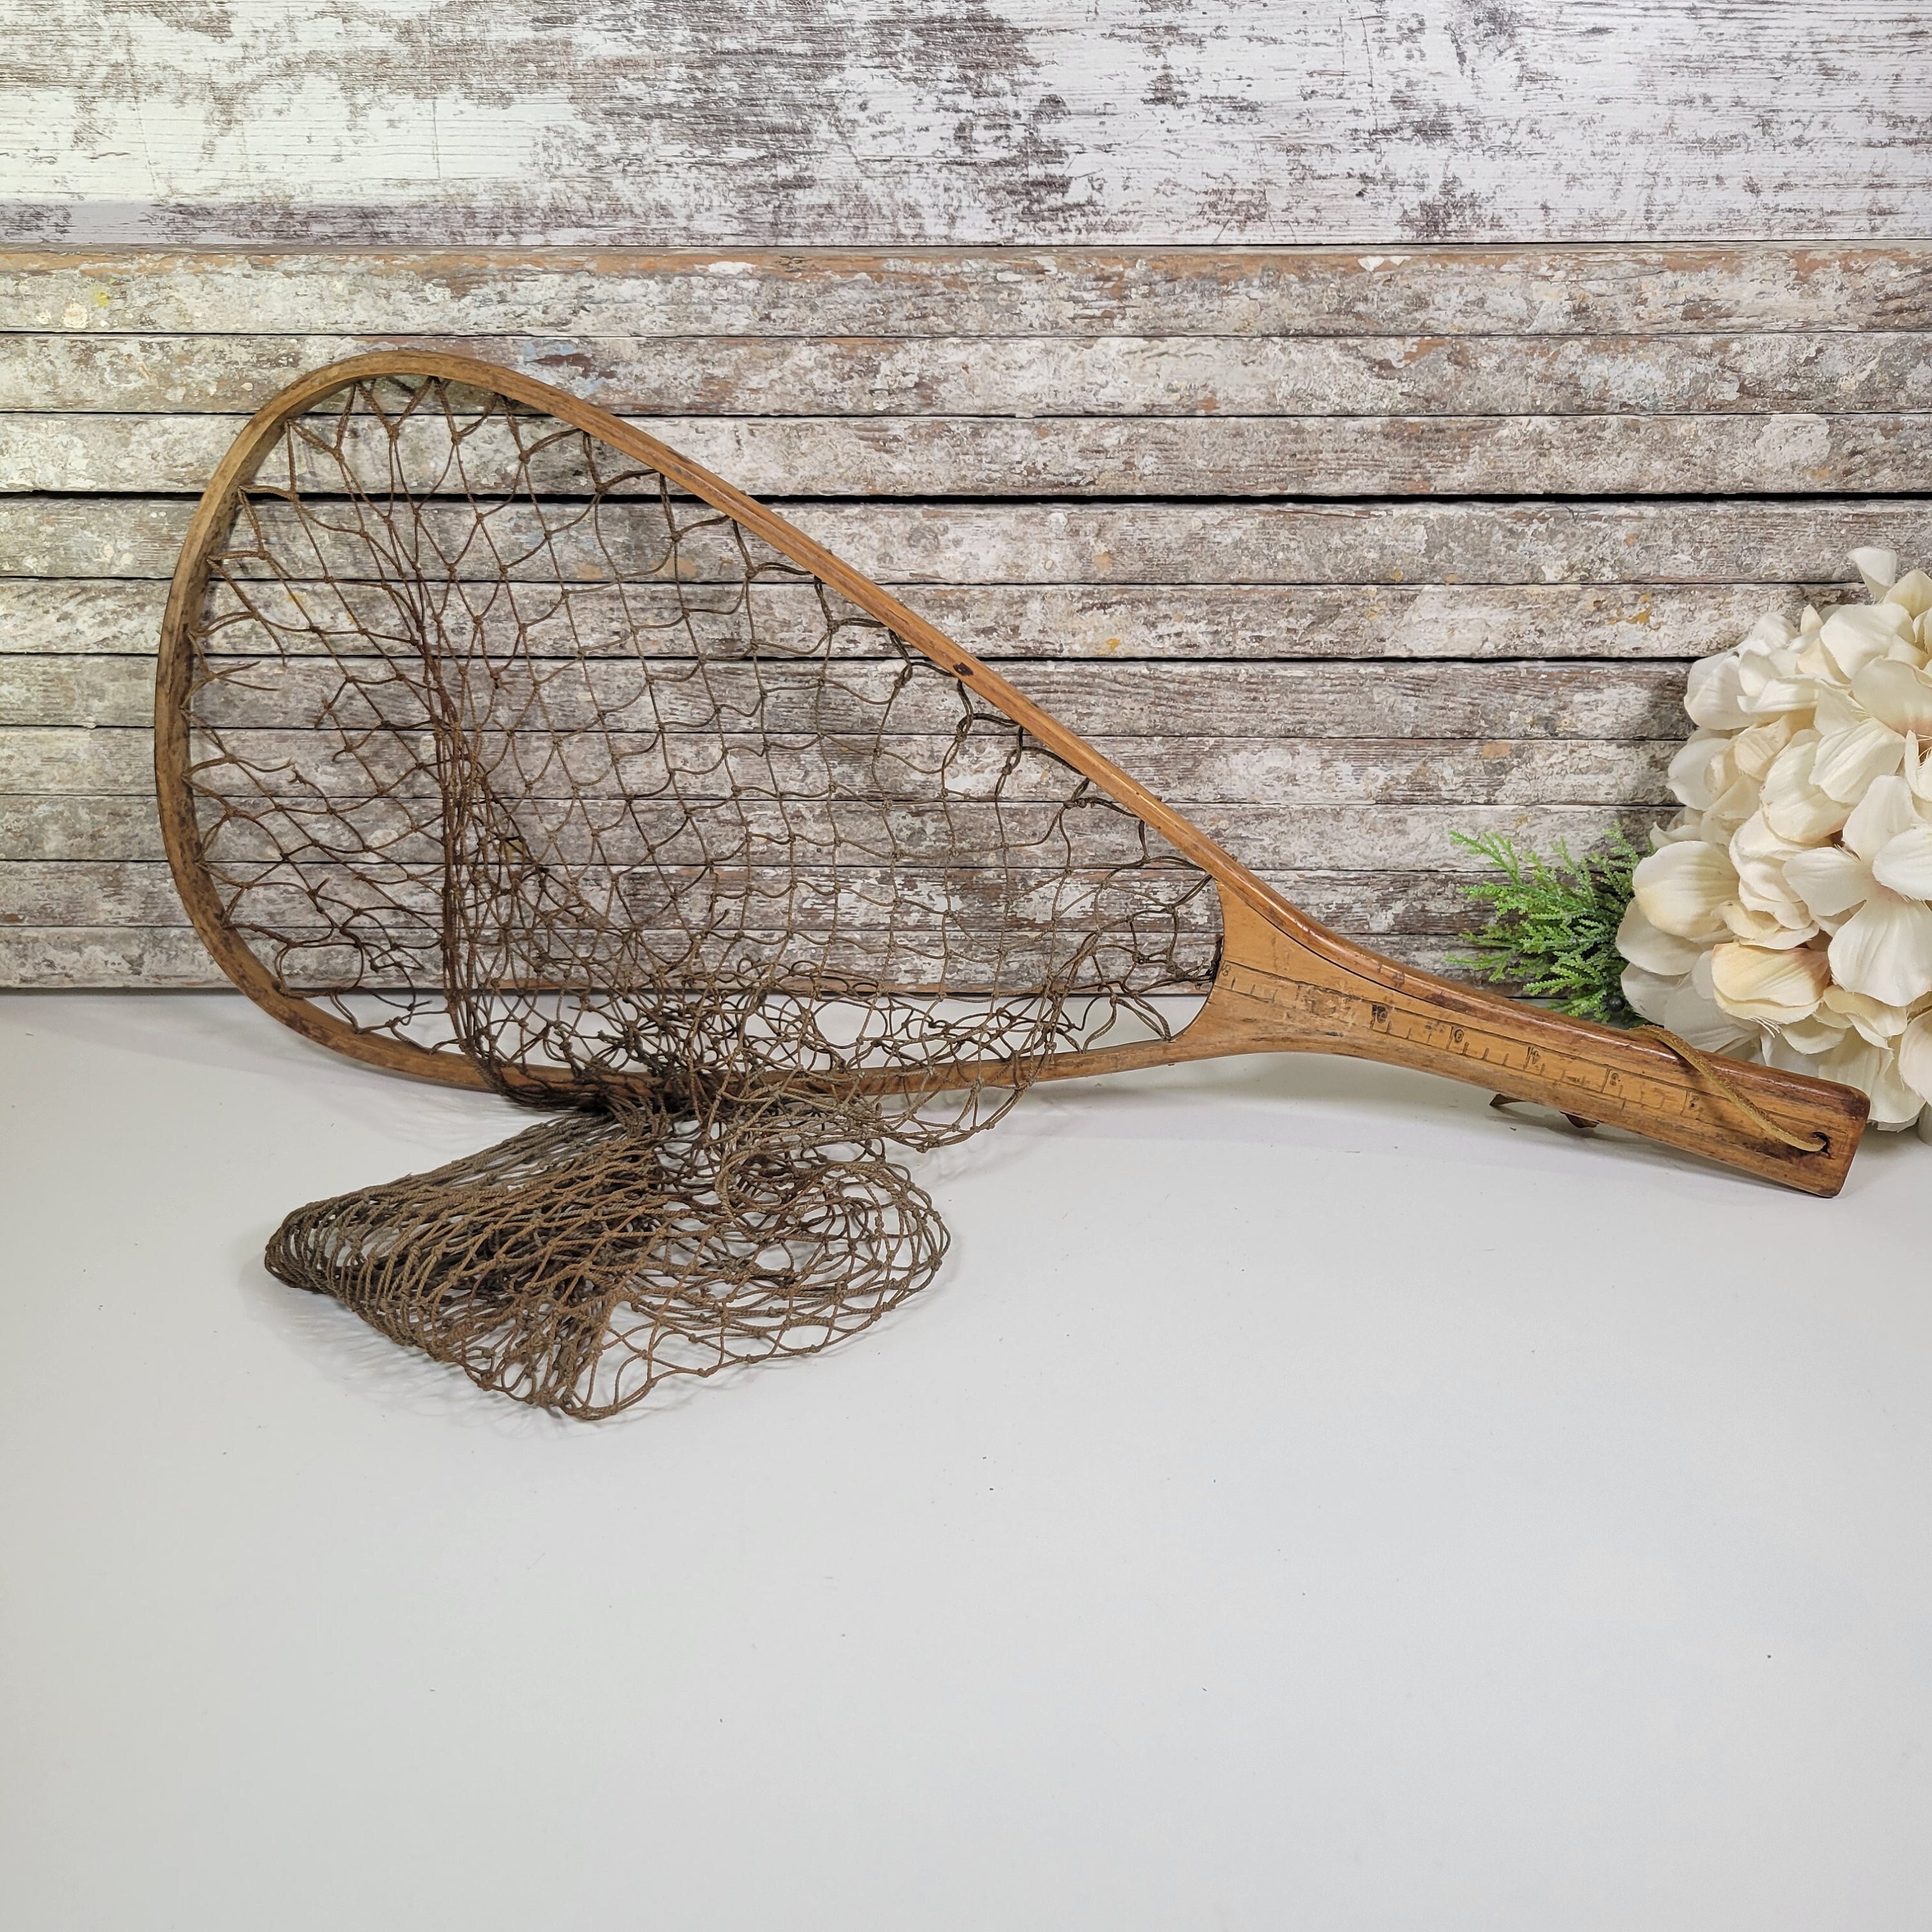 Your Choice Vintage Fishing Net, Trout Fly Fishing, Wood Framed Landing Net,  Camp Lodge Cabin Decor, Gift Idea 